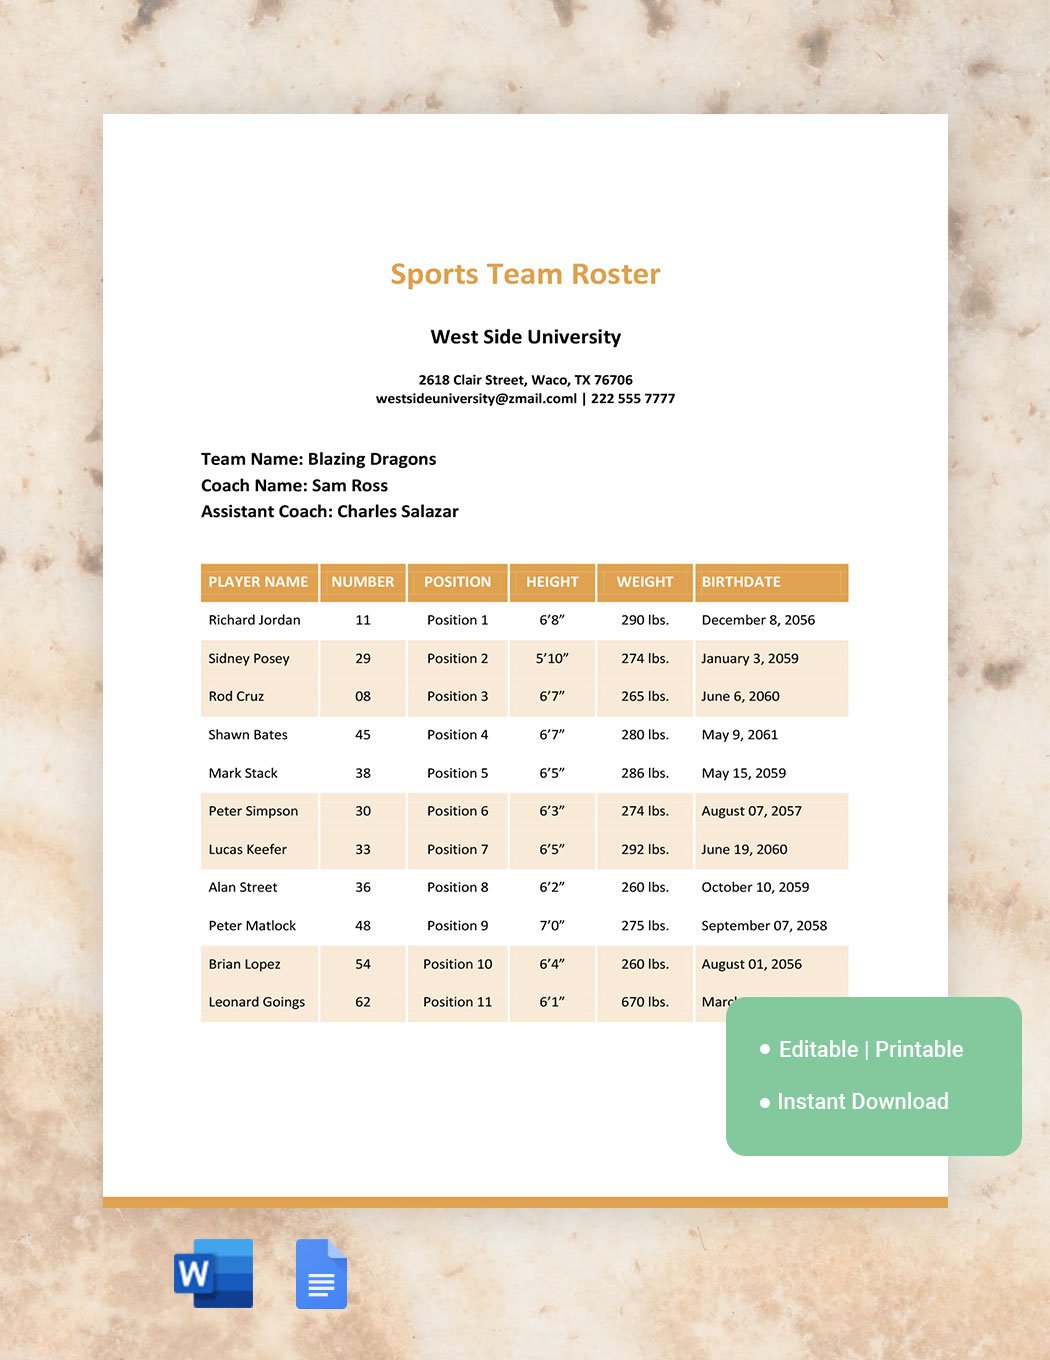 Sports Roster Template Download in Word, Google Docs